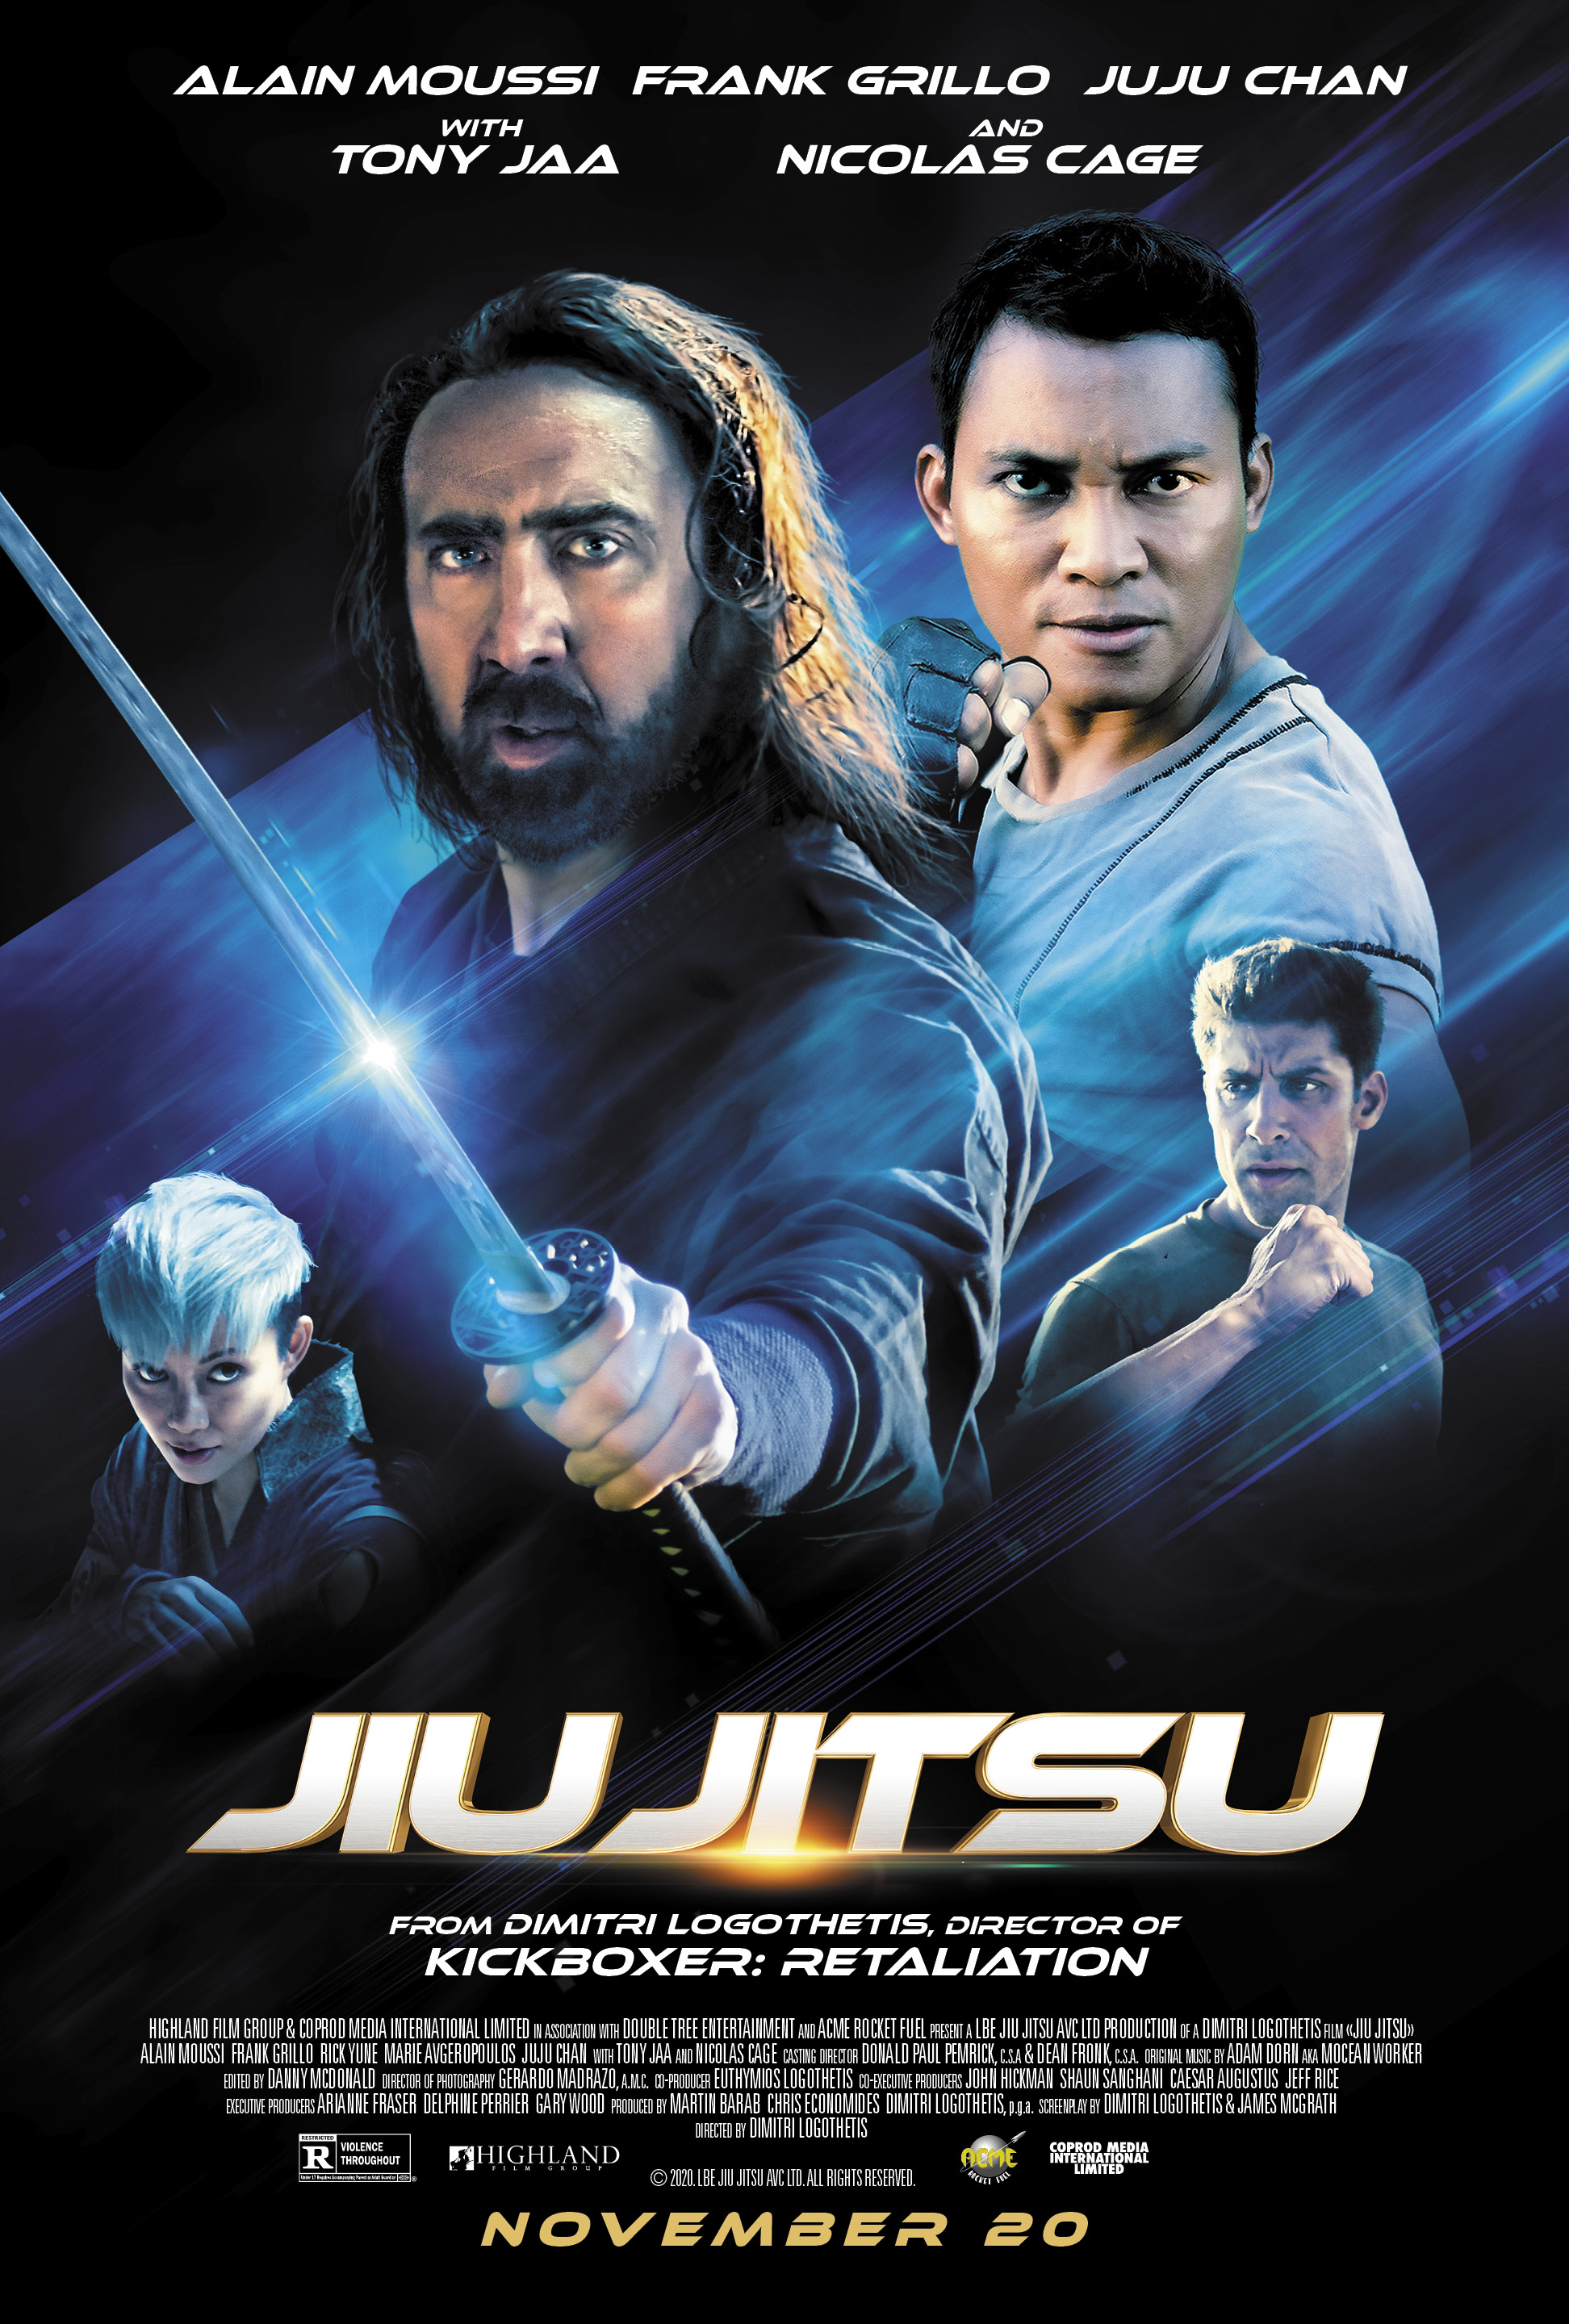 Review: JIU JITSU, or How to Ruin a Movie About Nic Cage Fighting an Alien